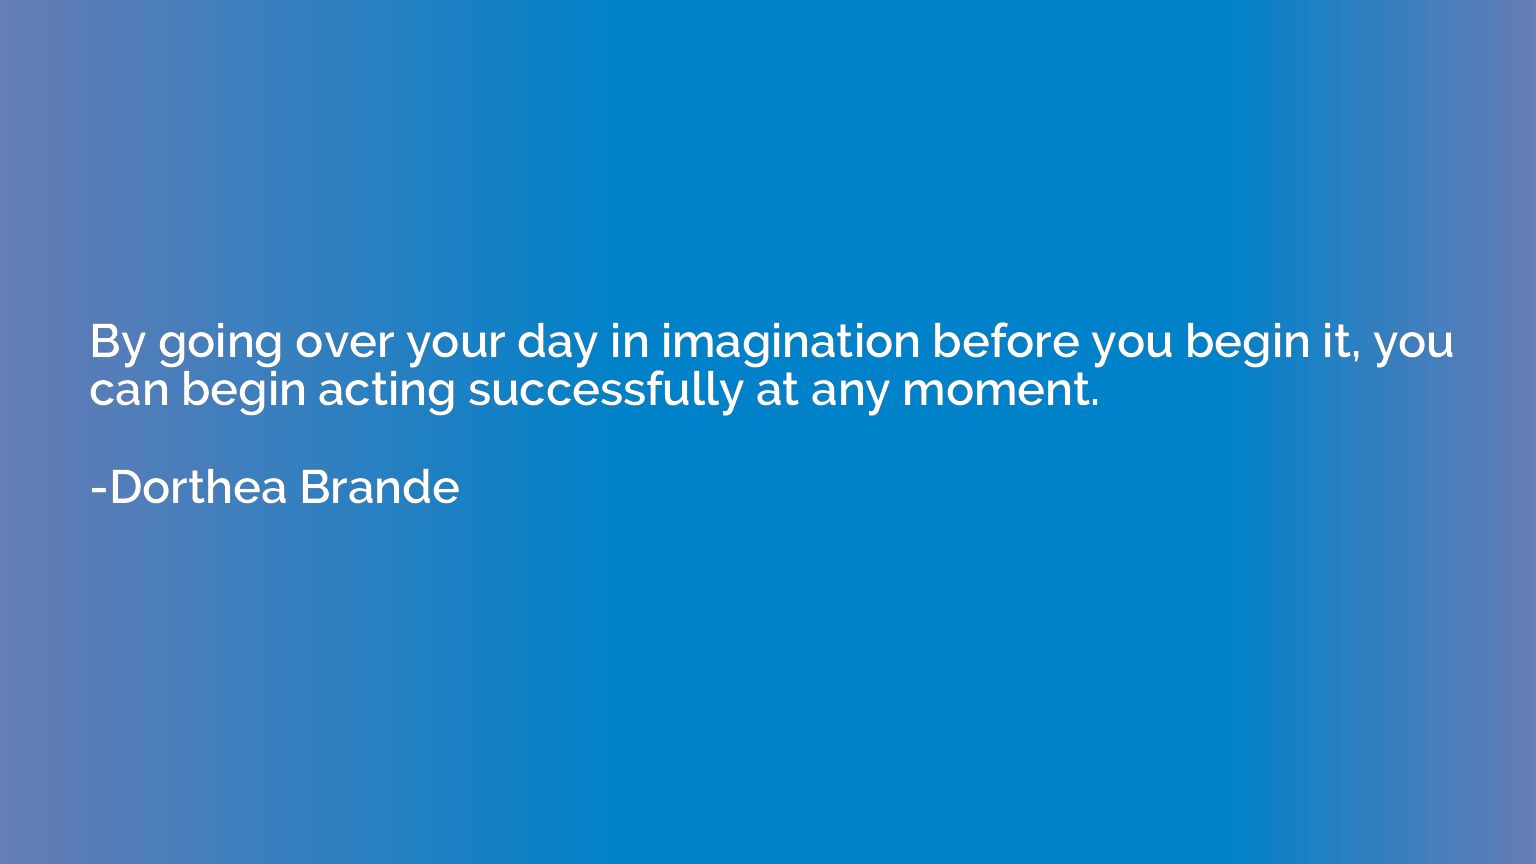 By going over your day in imagination before you begin it, y